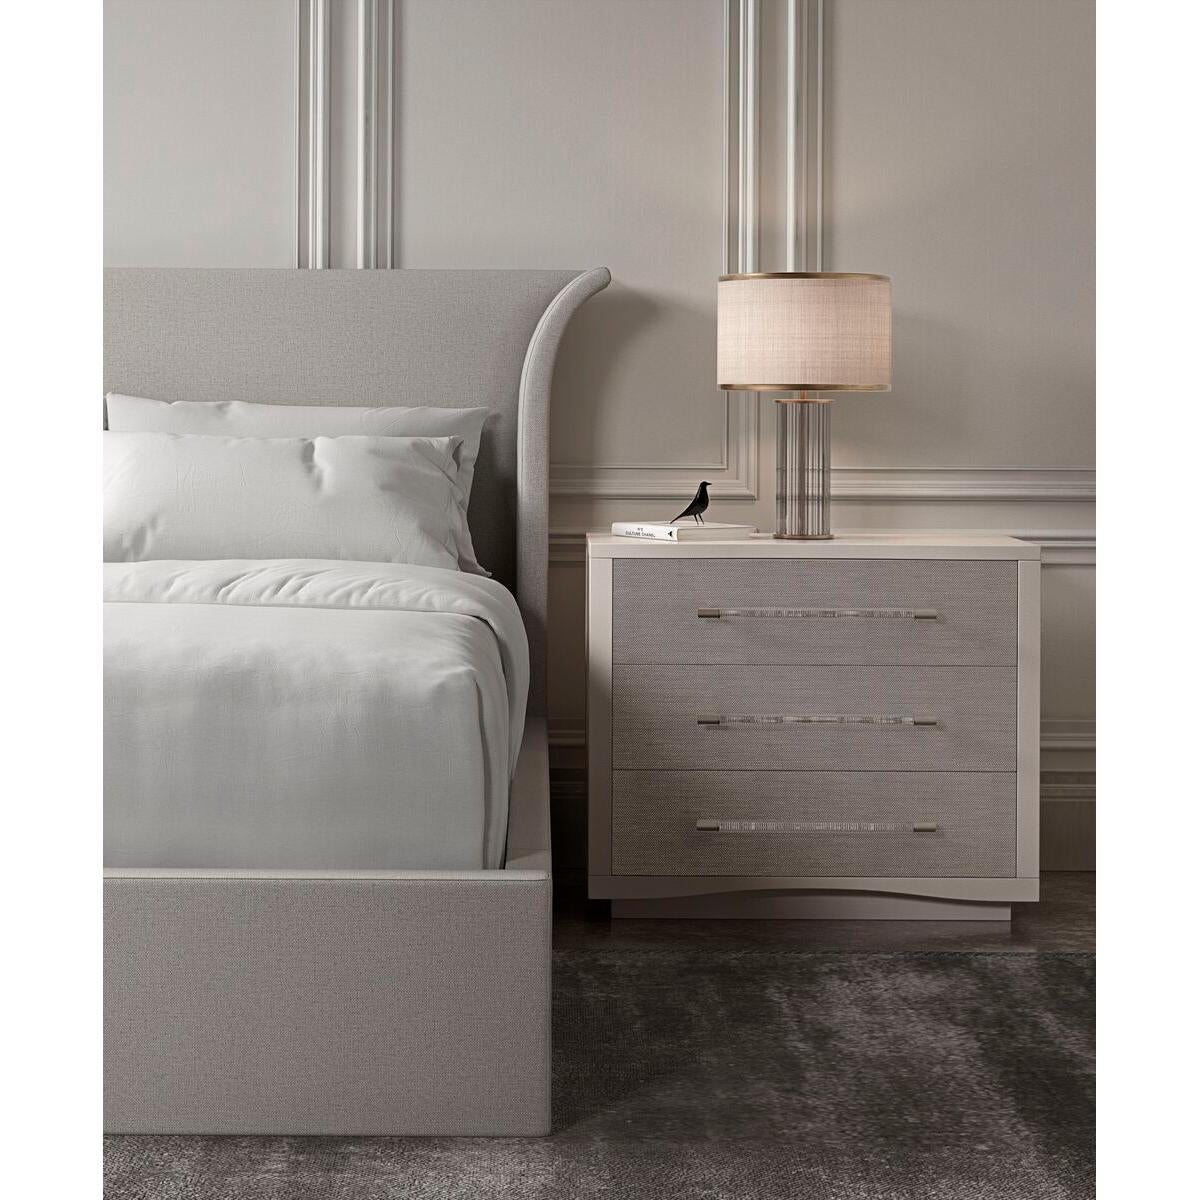 An elegant US queen-sized upholstered bed frame featuring a high headboard that is flared out and curves gently at the sides. The frame is wrapped in a light natural color fabric with a subtle textured finish, which suggests a contemporary design